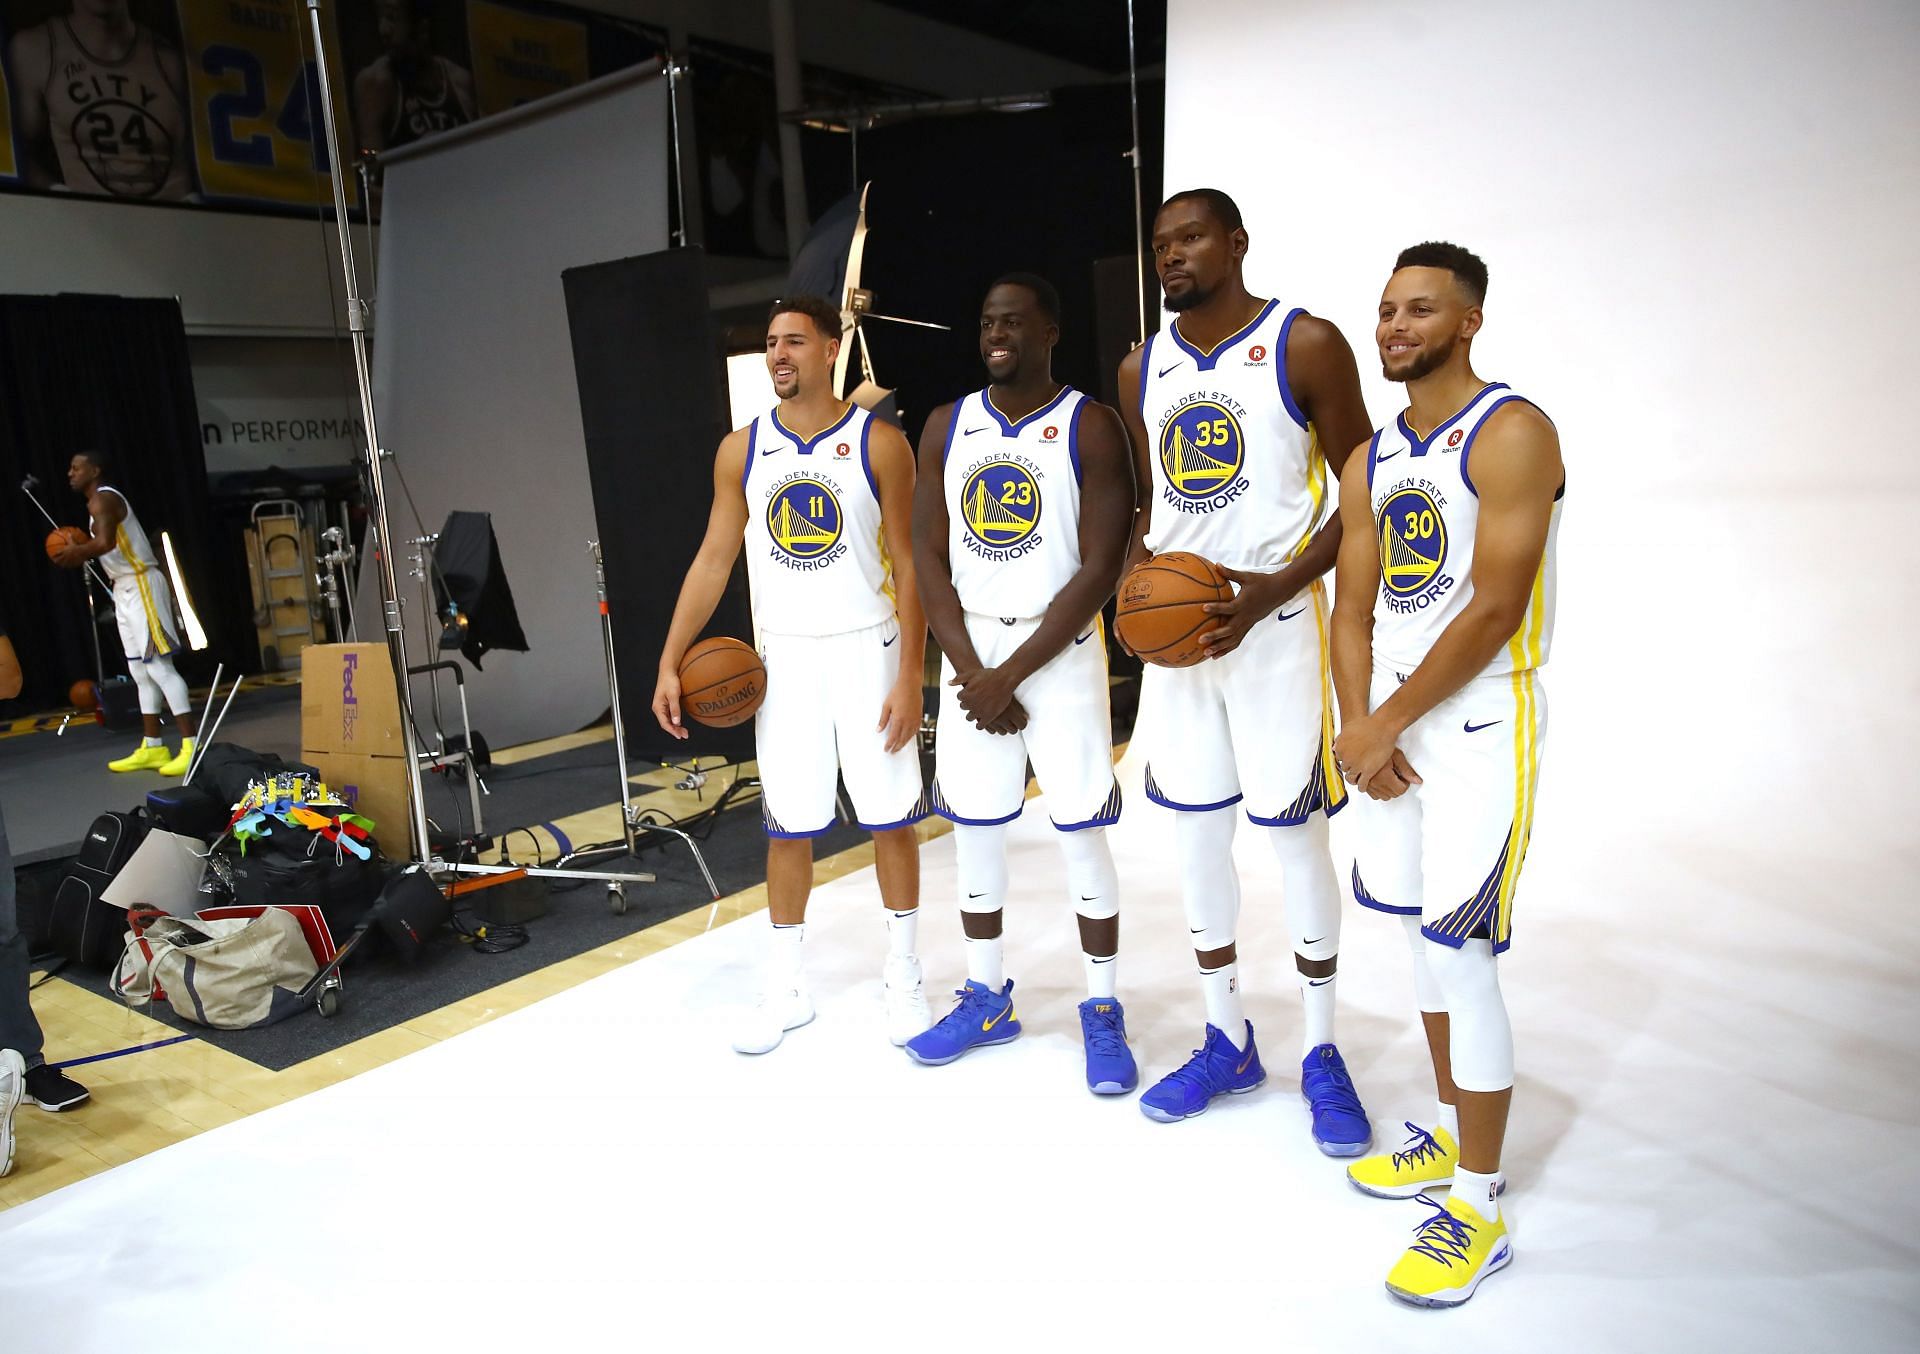 (R-L) Steph Curry, Kevin Durant, Draymond Green and Klay Thompson of the Golden State Warriors in 2017